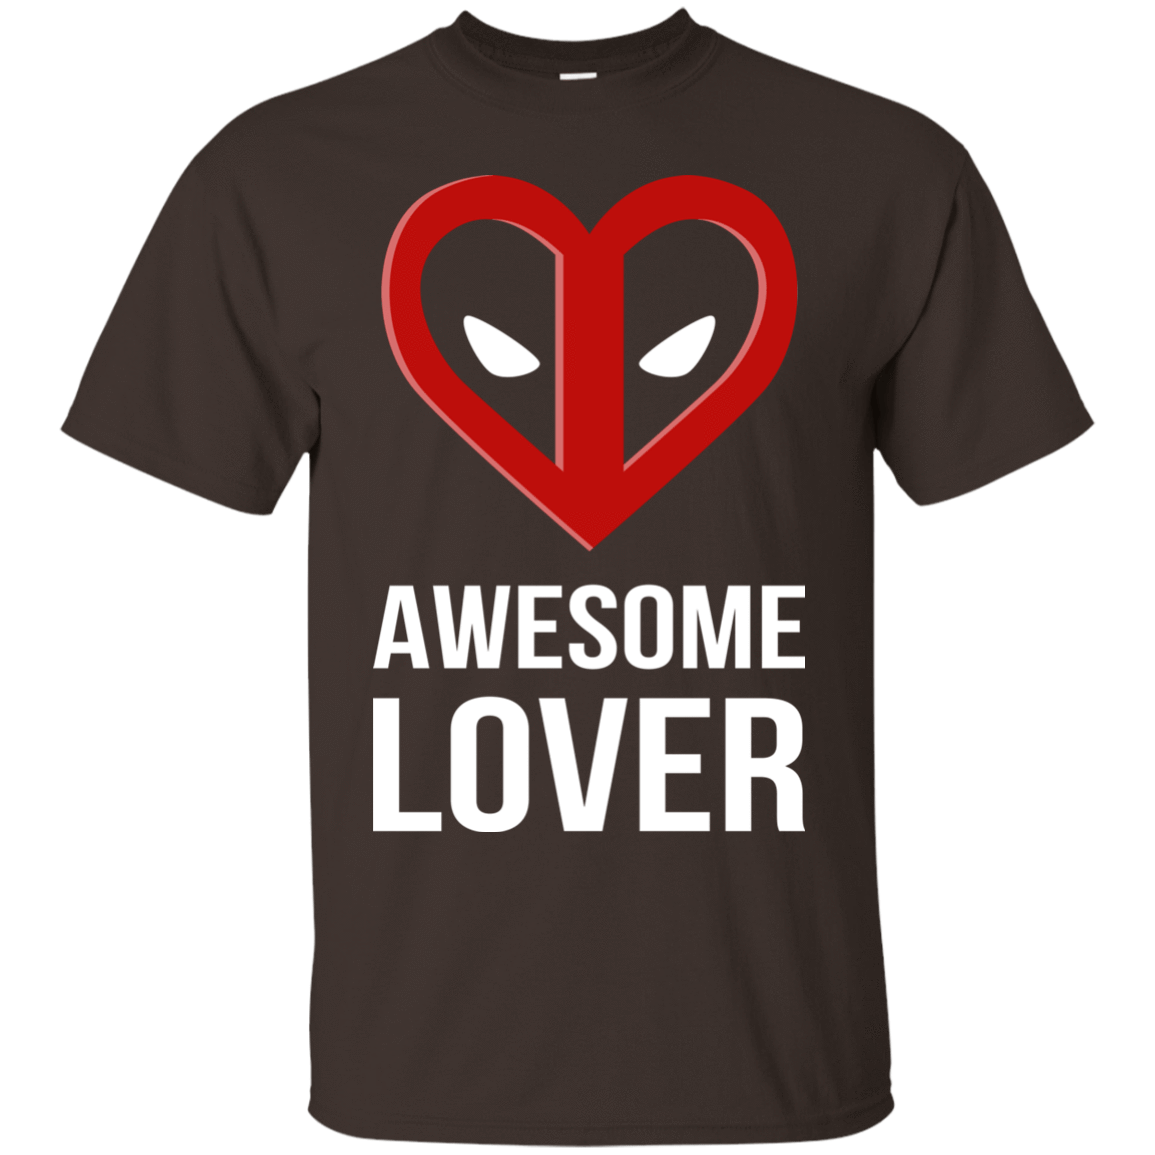 T-Shirts Dark Chocolate / Small Awesome lover T-Shirt